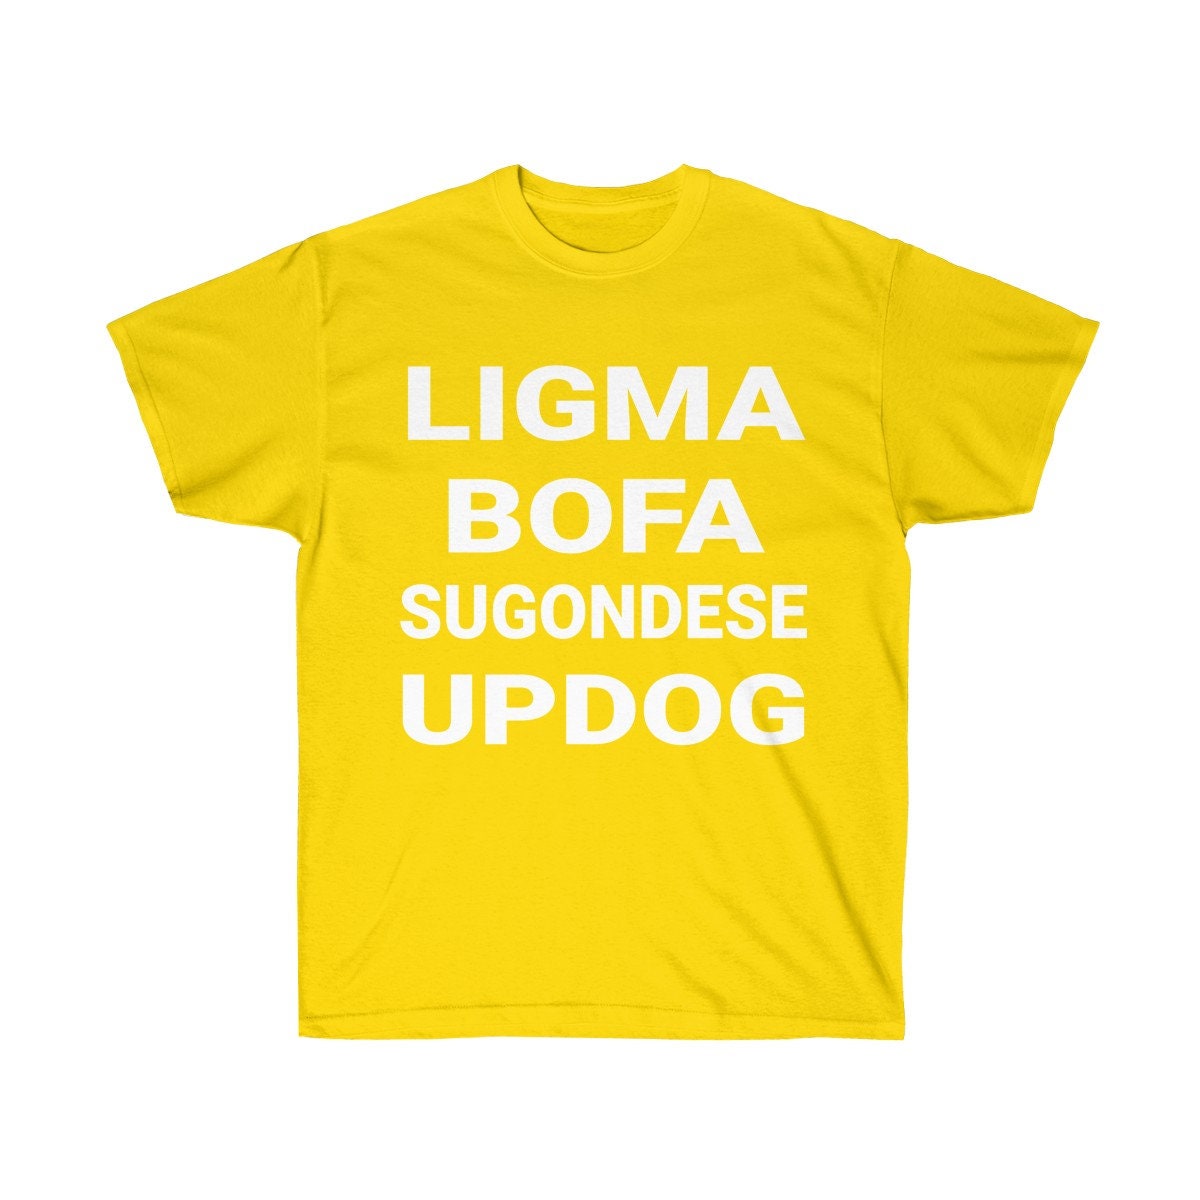  Beware of The Ligma Variant Funny Joke T-Shirt : Clothing,  Shoes & Jewelry